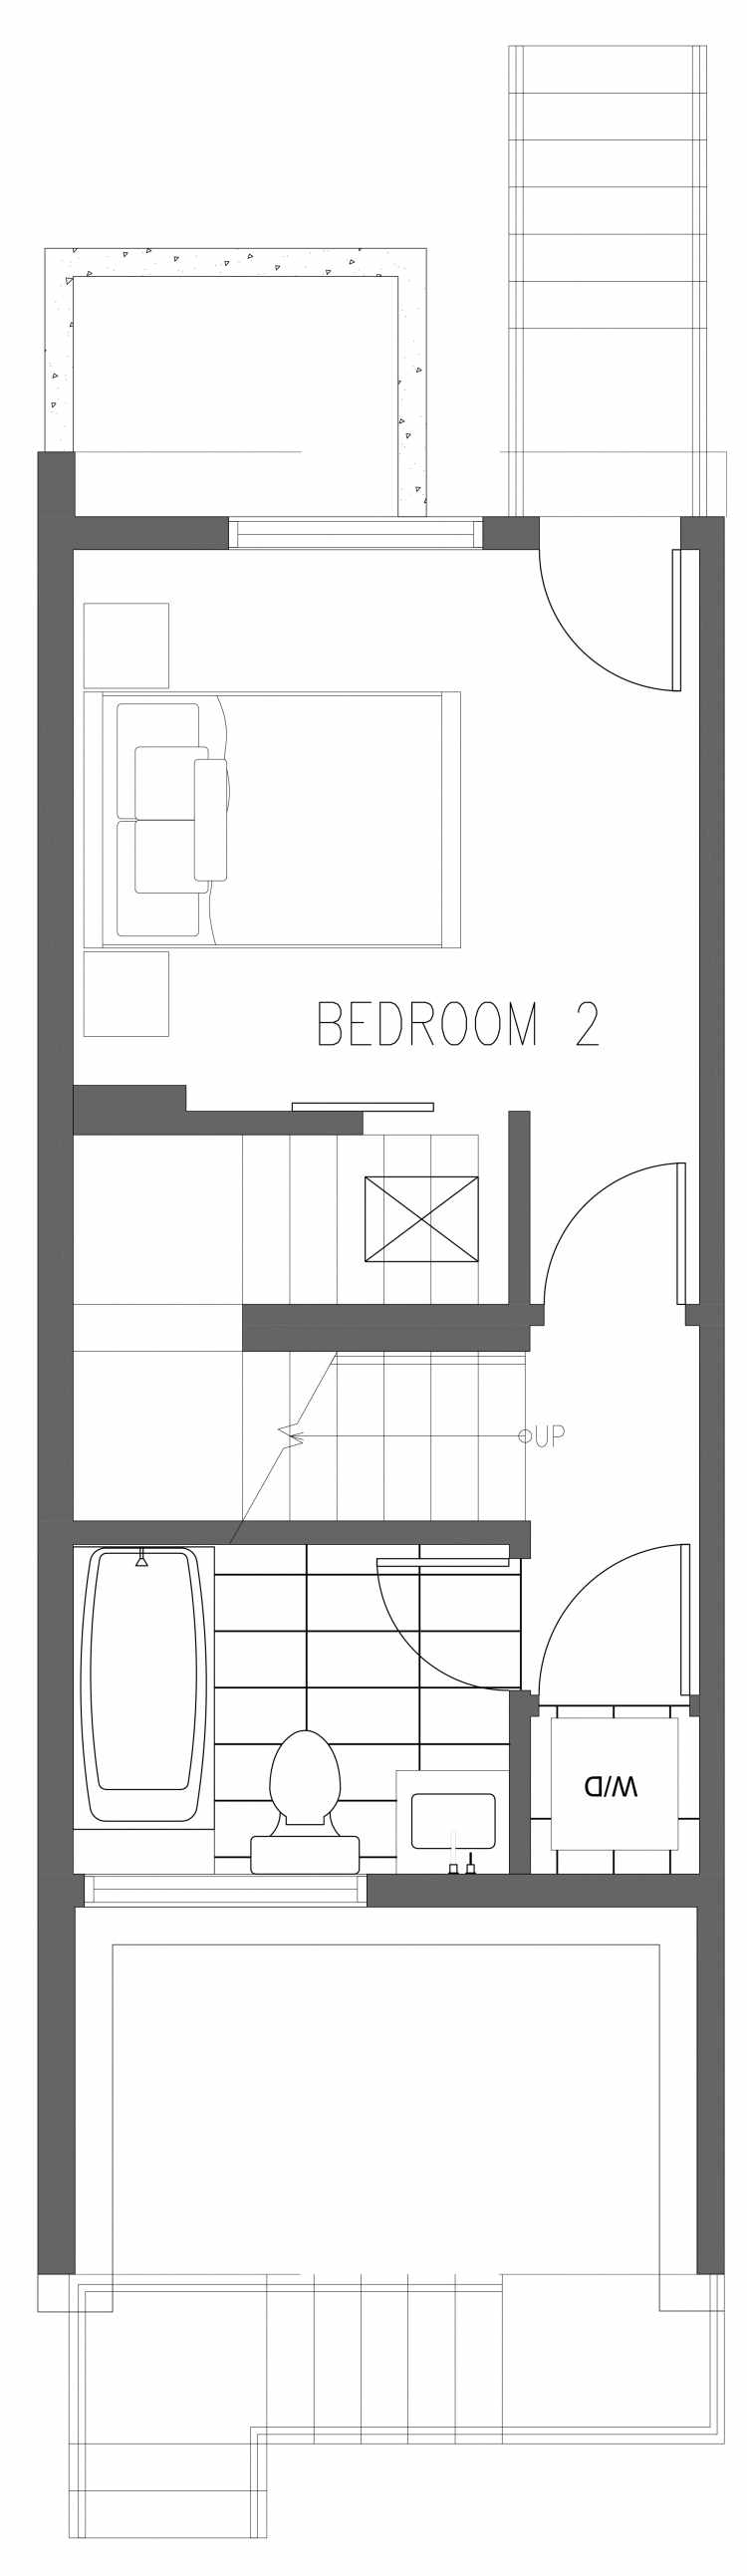 First Floor Plan of 2361 Beacon Ave S, One of the Brea Townhomes in North Beacon Hill